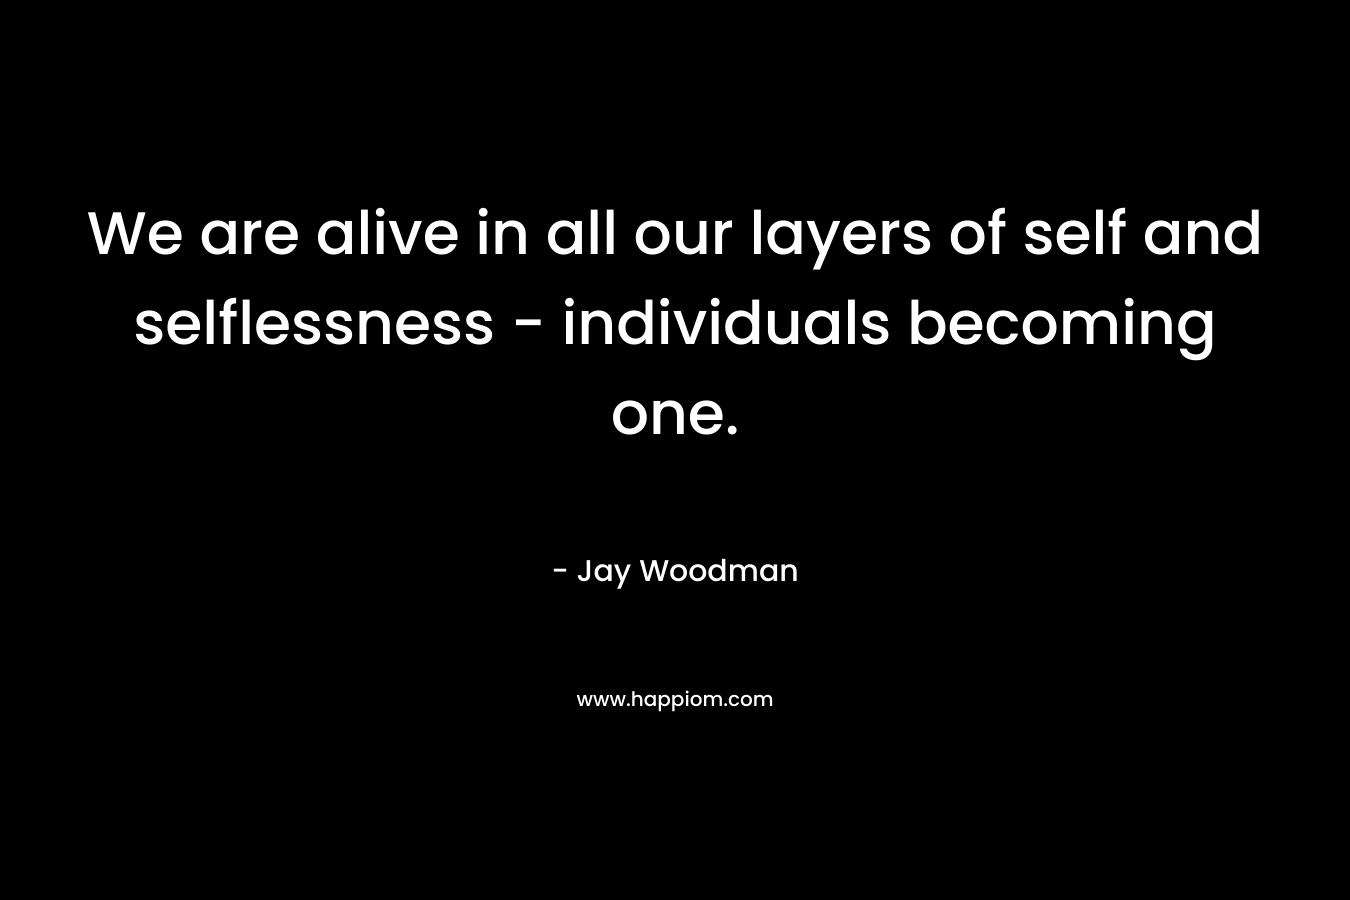 We are alive in all our layers of self and selflessness – individuals becoming one. – Jay Woodman